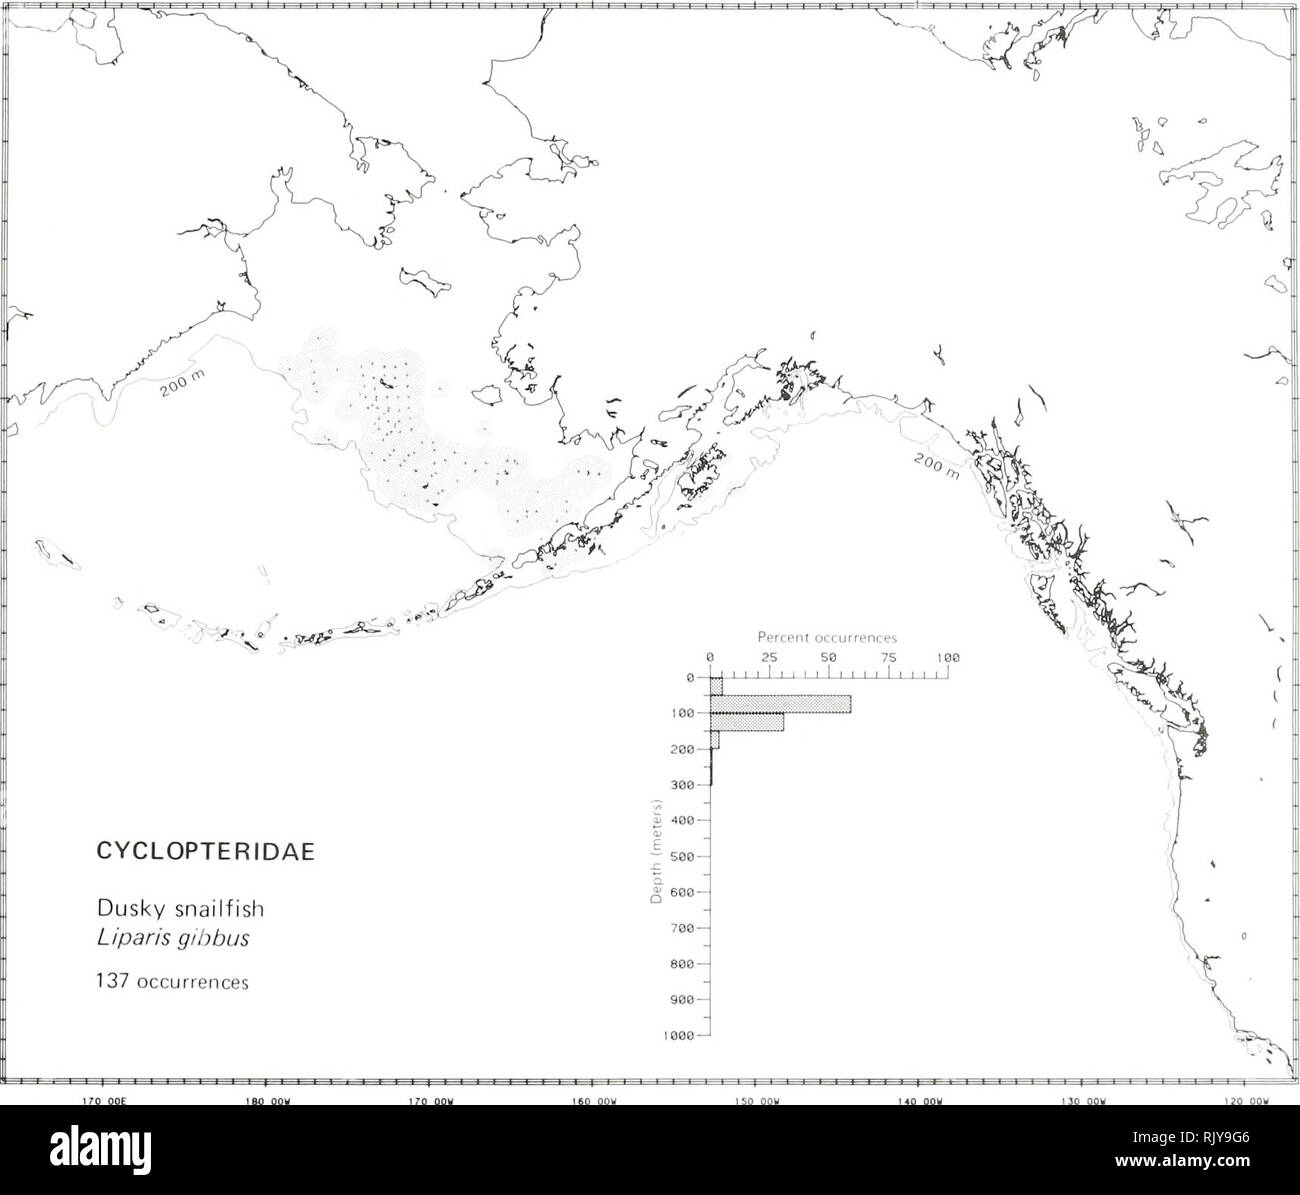 . Atlas and zoogeography of common fishes in the Bering Sea and Northeastern Pacific / M. James Allen, Gary B. Smith. Fishes Bering Sea Geographical distribution.. DUSKY SNAILFISH, Liparis gibbus Bean 1881 Cyclopteridae: Lumpfishes and Snailfishes Literature Reported from Avacha Bay in southeastern Kamchatka to southeastern Alaska, west to Unalaska Island, north along the Alaskan coast of the Bering Sea, across the Canadian Arctic and south in the North Atlantic to Nova Scotia (Able and McAllister 1980), at depths of 25 to 366 m (Able and McAllister 1980; Eschmeyer and Herald 1983). Survey dat Stock Photo